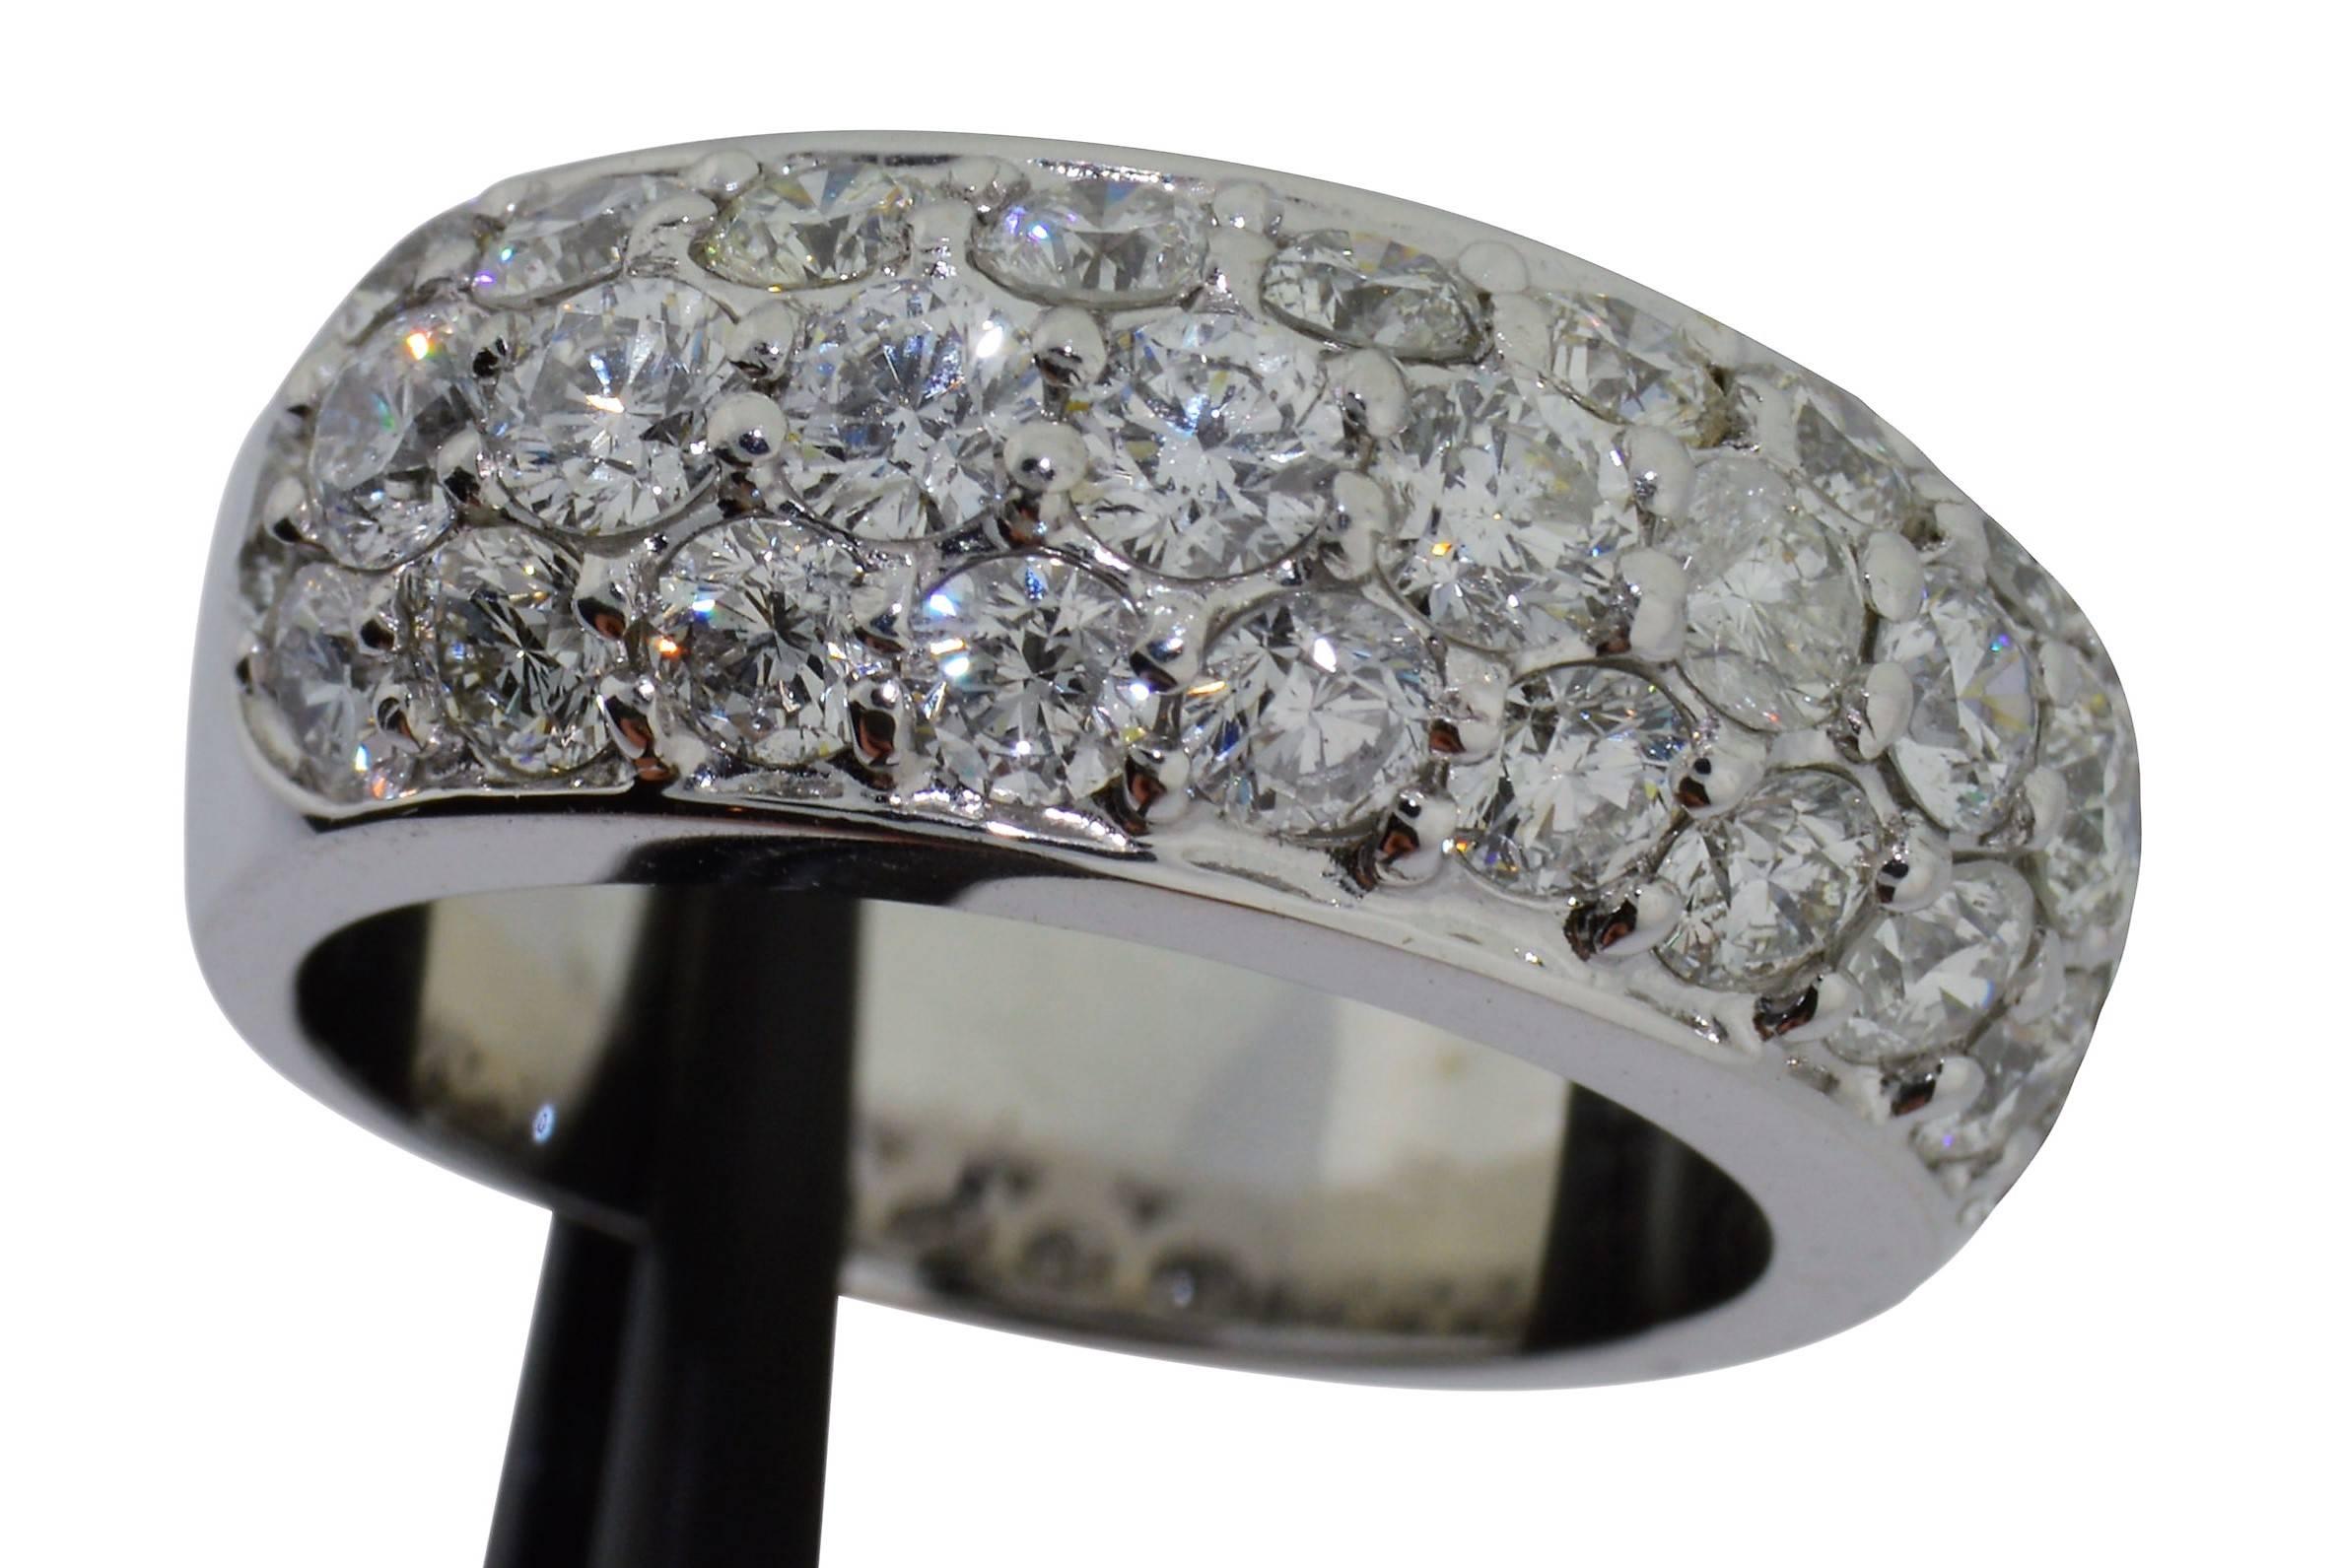 Expertly crafted in platinum, this classic, gently domed, pave' diamond ring is a real sparkler. The entire top of this ring is encrusted with 3.00cts of high quality,  round brilliant cut diamonds VS/SI clarity, E/F color. The clean lines of this